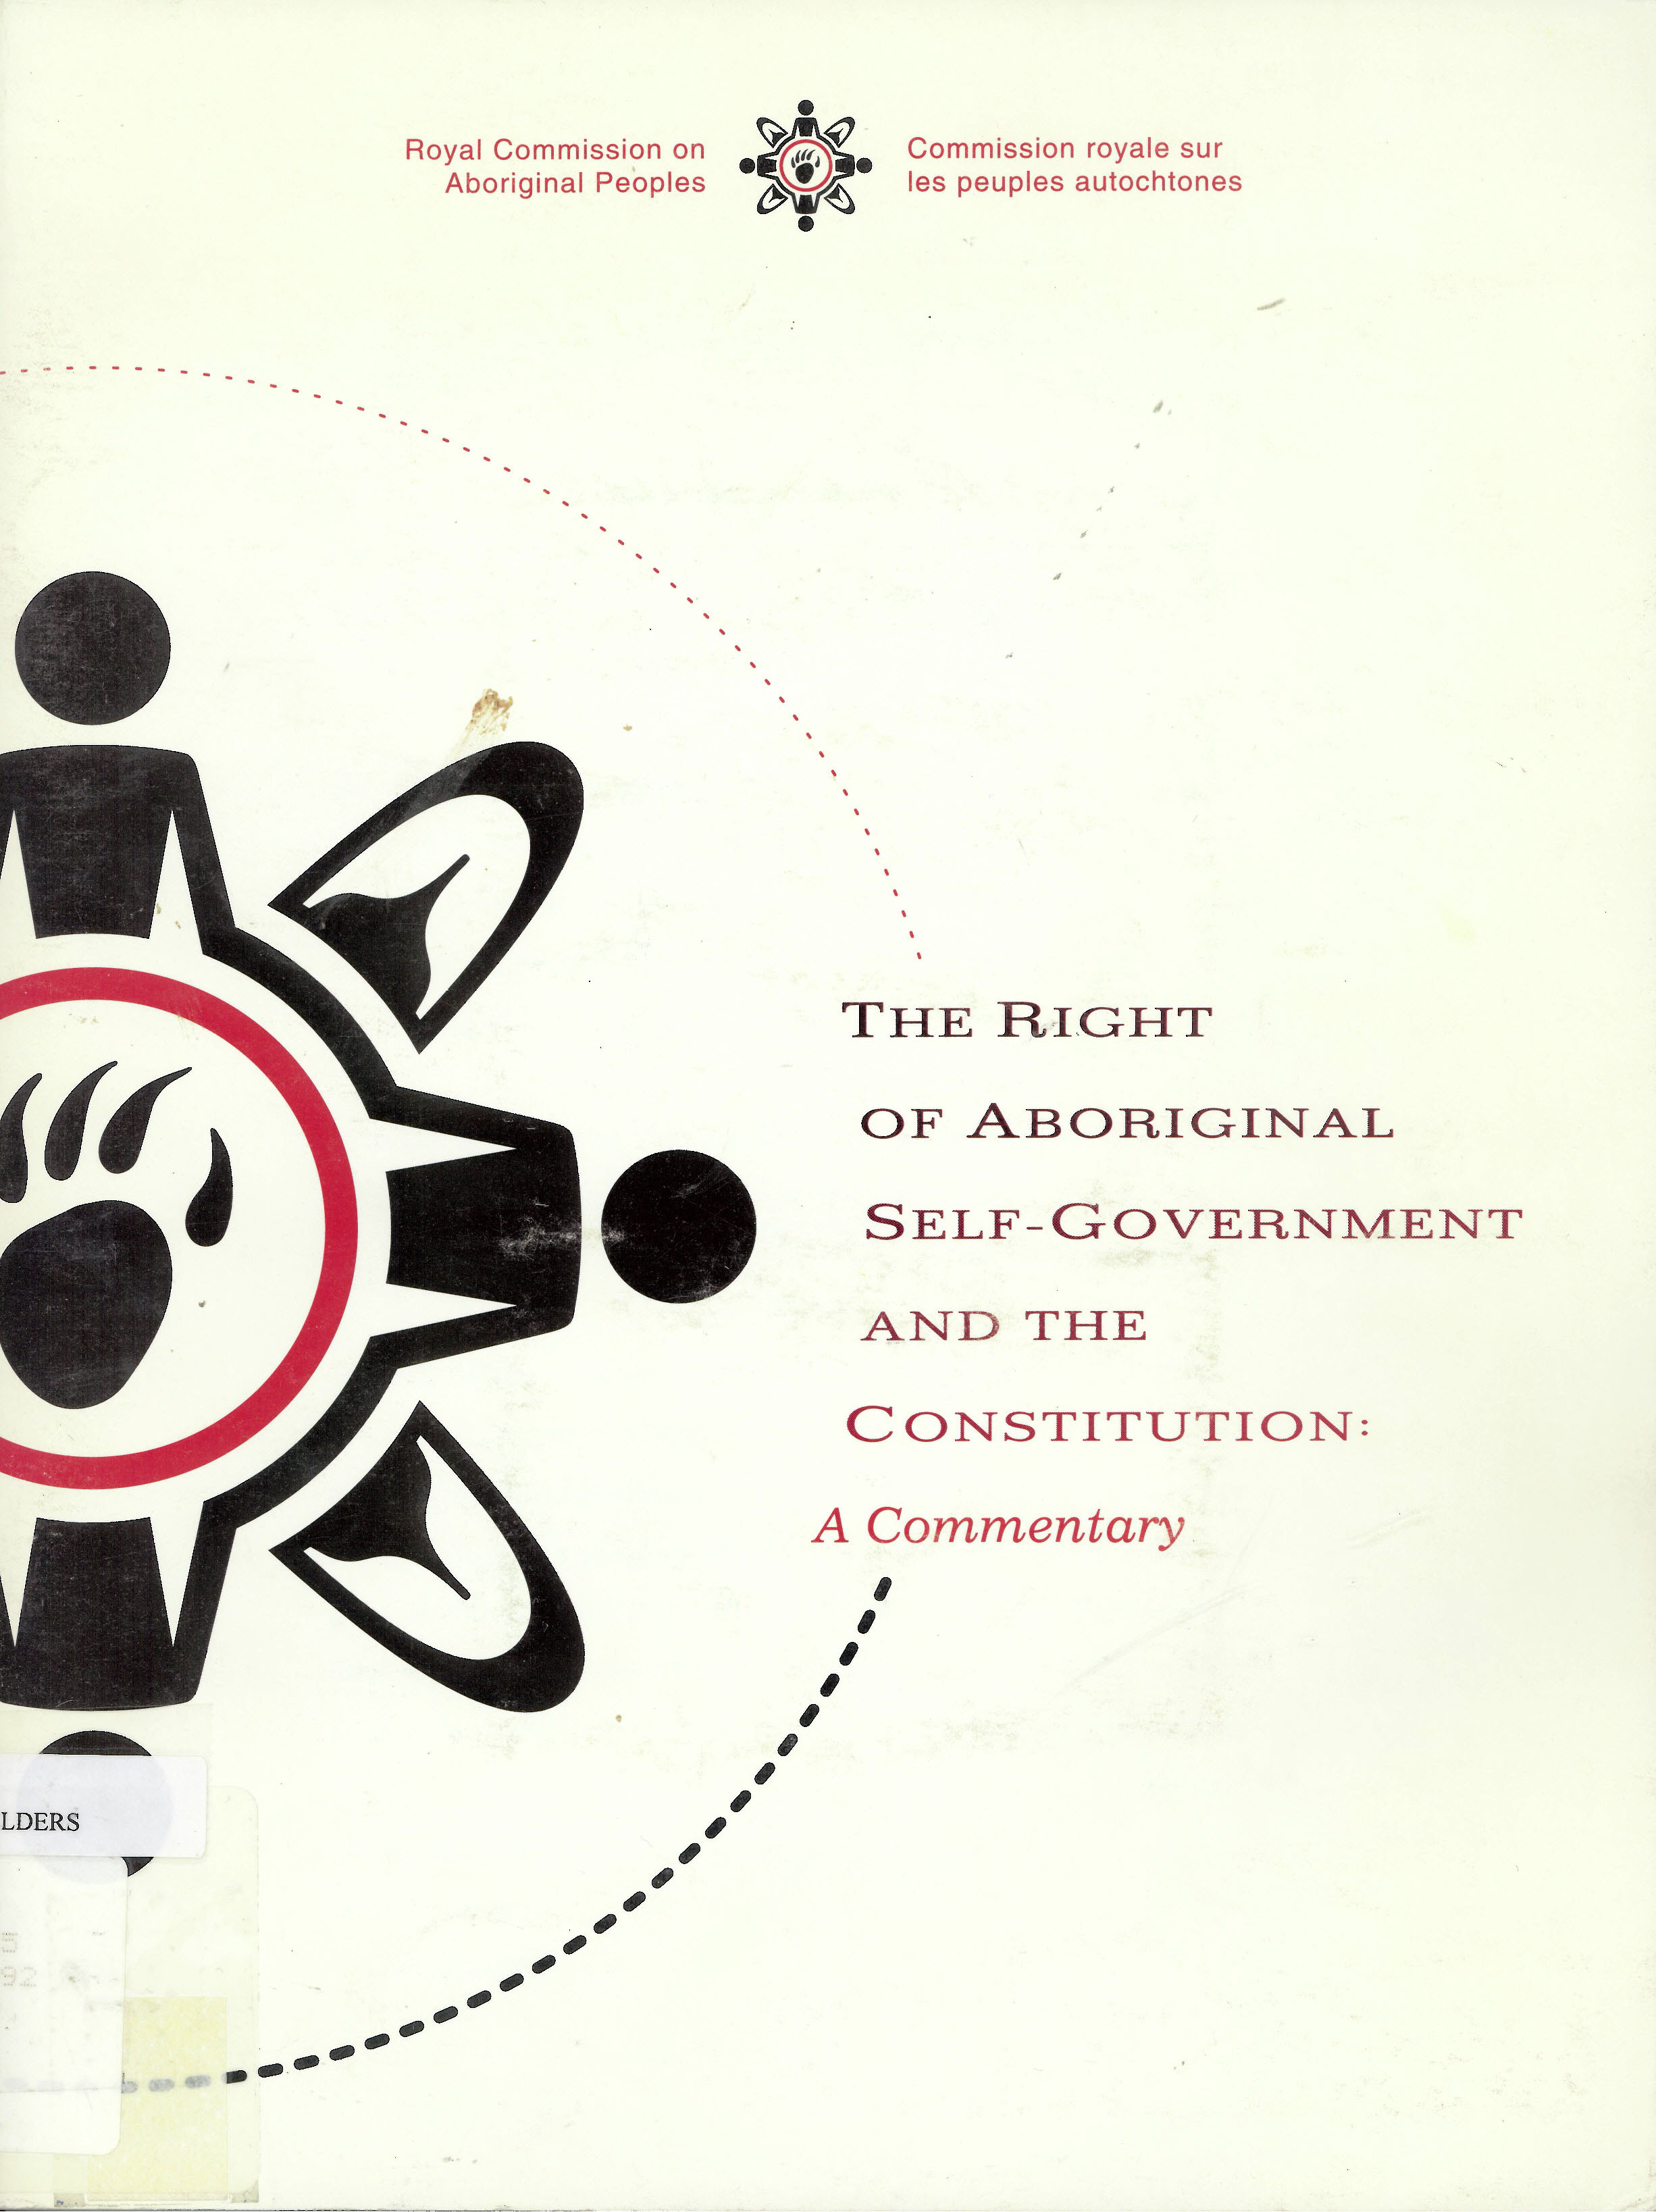 The right of aboriginal self-government and the consitution: : a commentary by the Royal Commission on Aboriginal Peoples